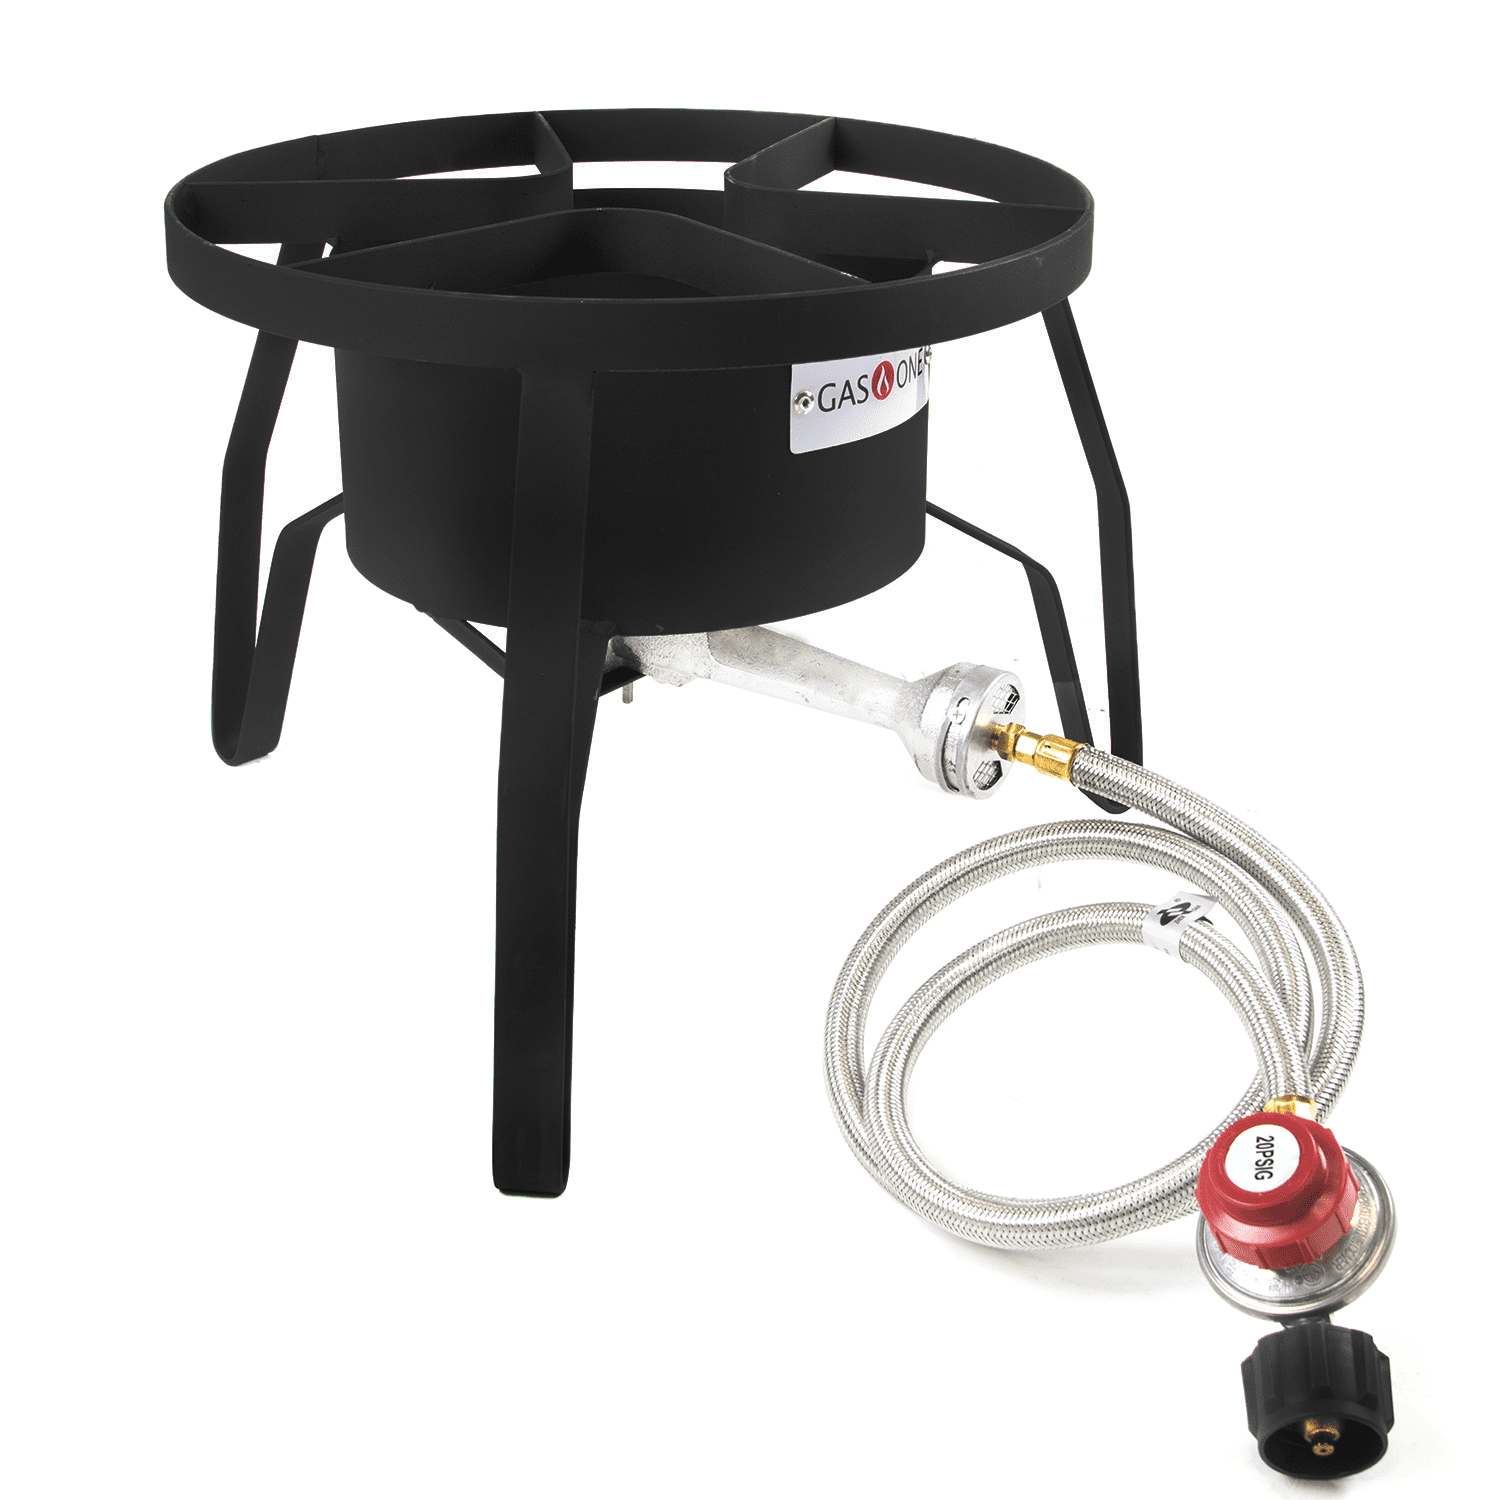 GAS ONE 1 Burner Propane Camping Stove